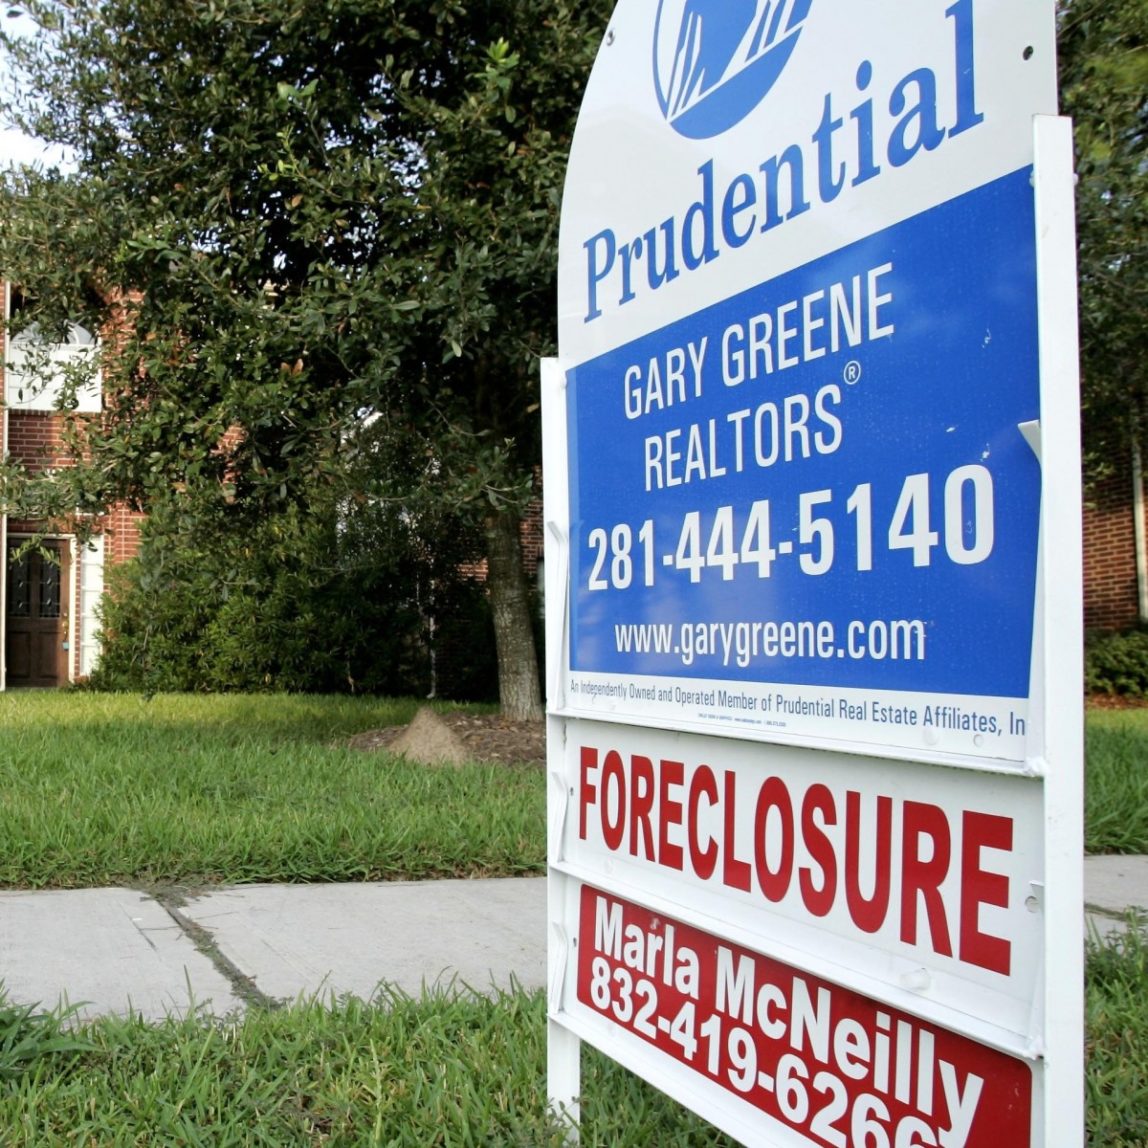 A foreclosure home for sale is shown in this Aug. 22, 2006 file photo taken in Spring, Texas. (AP Photo/David J. Phillip, File)